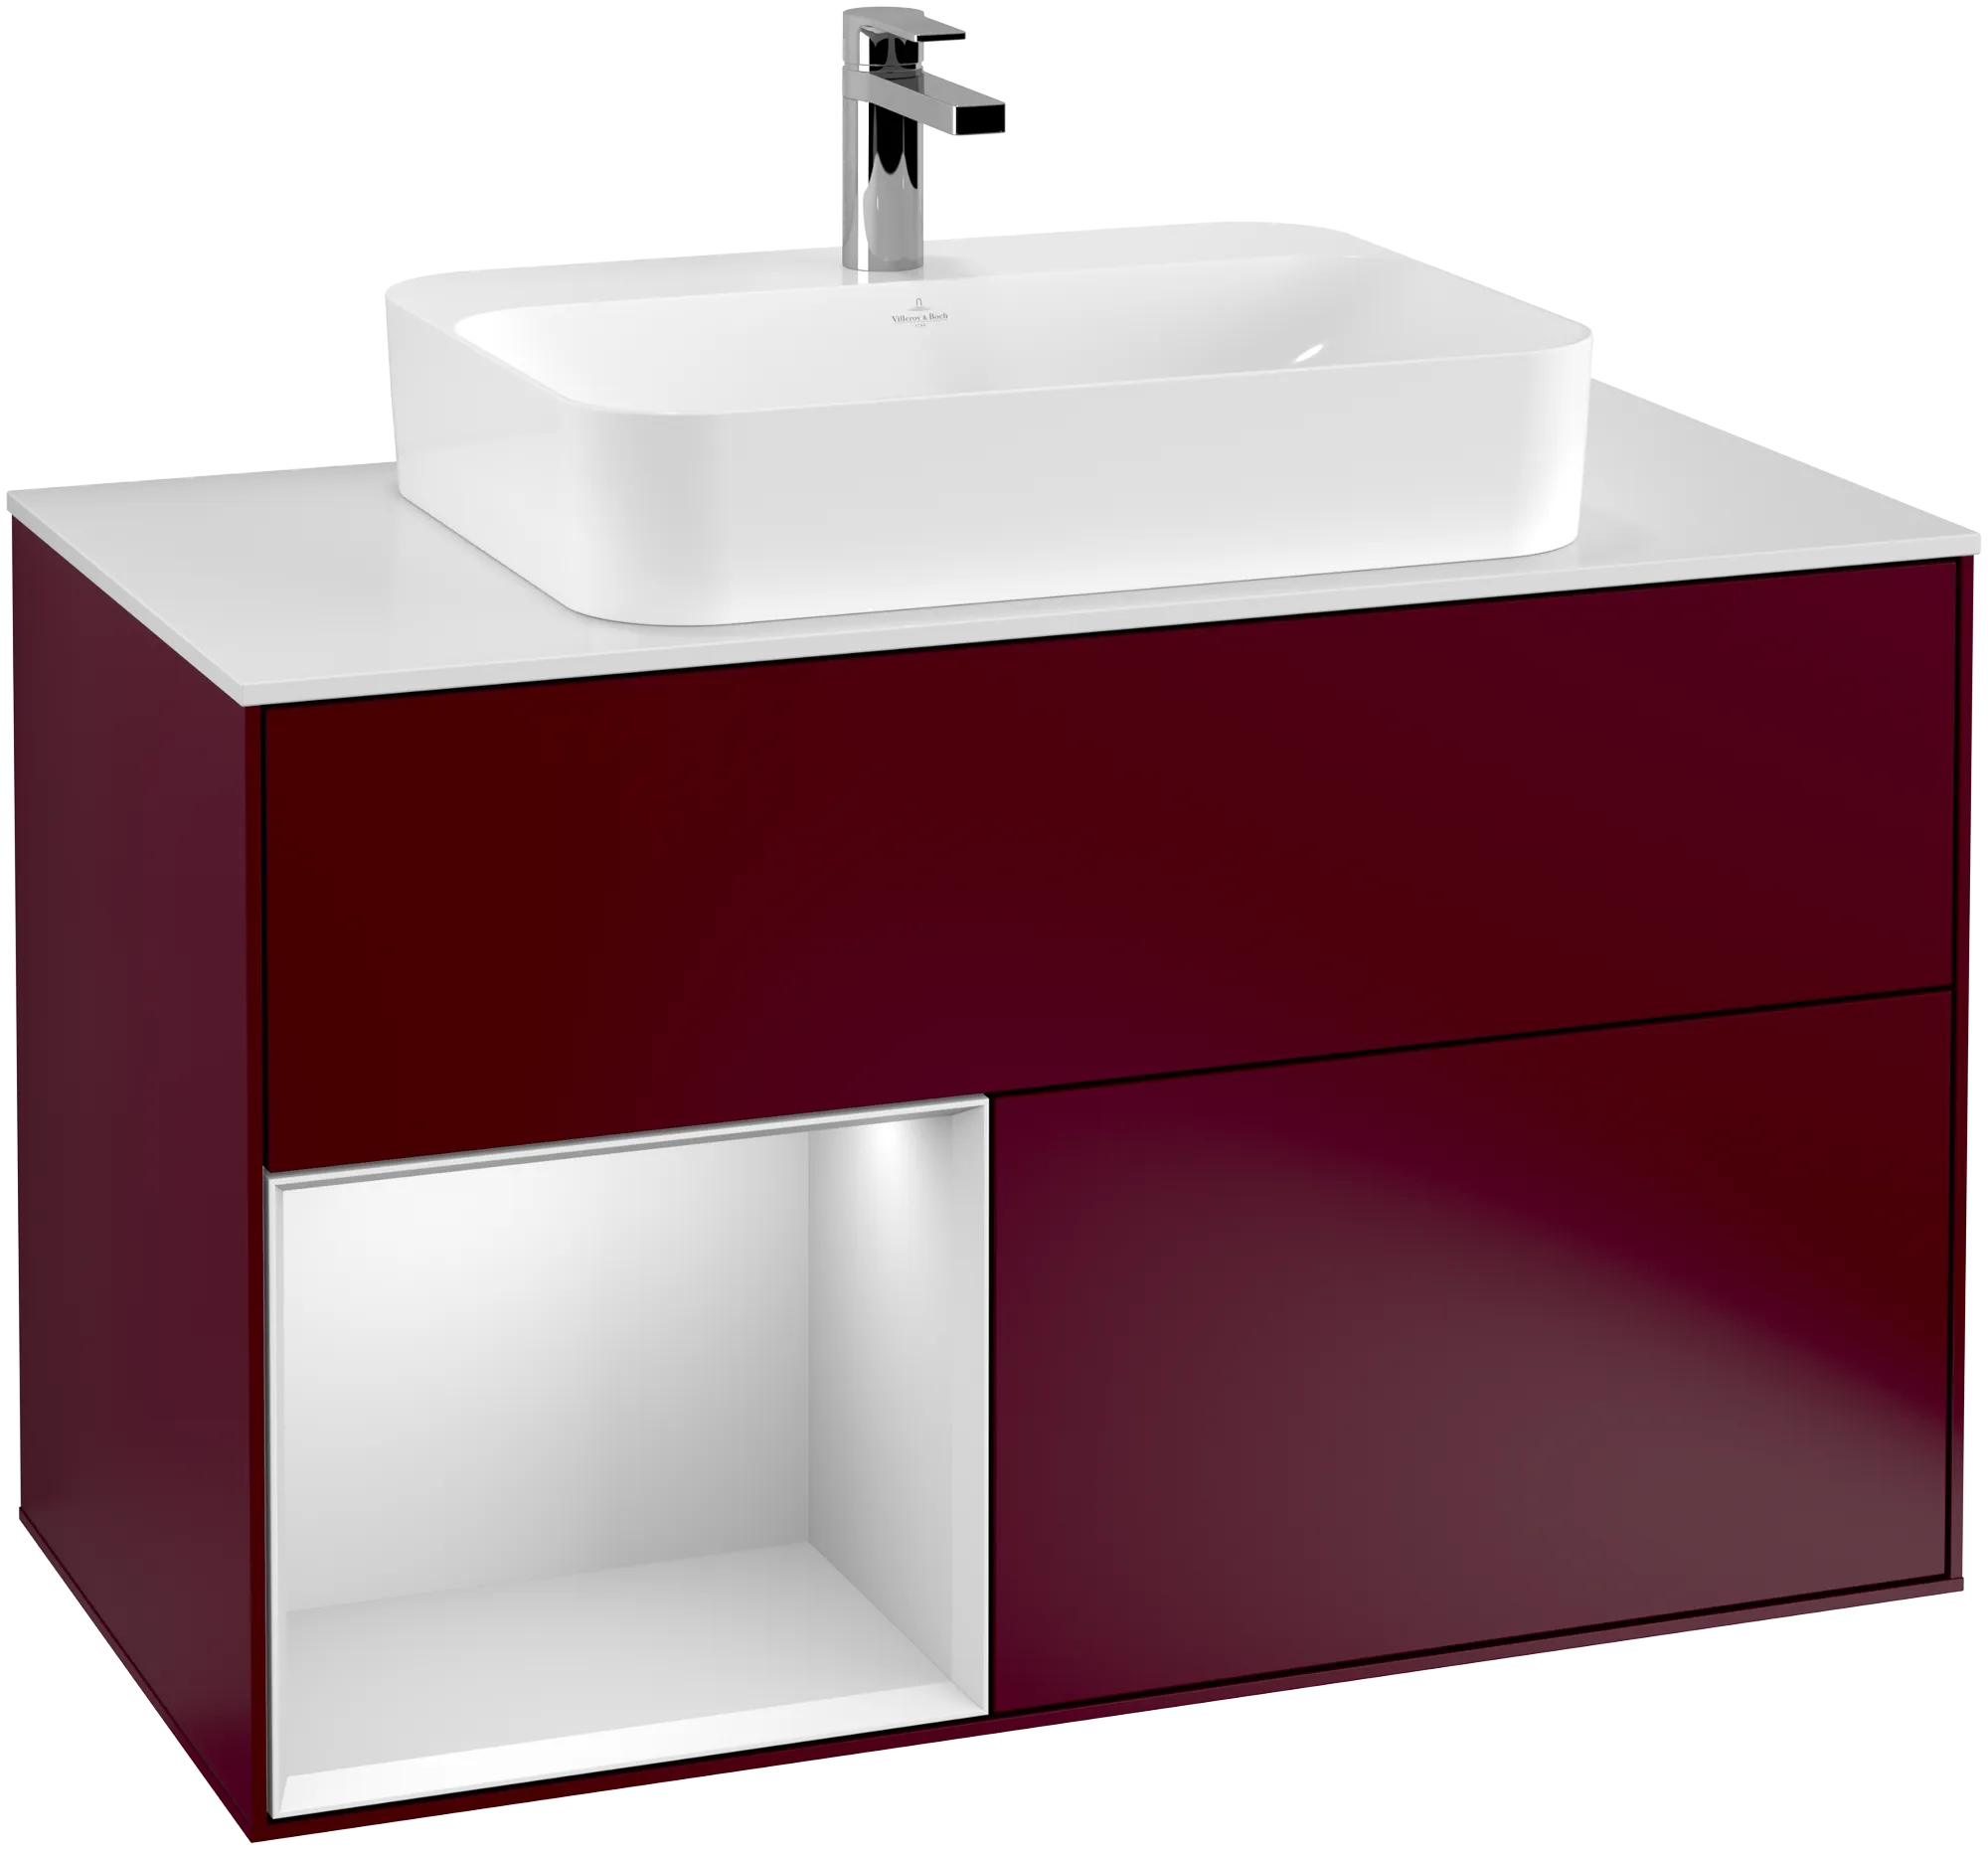 VILLEROY BOCH Finion Vanity unit, with lighting, 2 pull-out compartments, 1000 x 603 x 501 mm, Peony Matt Lacquer / White Matt Lacquer / Glass White Matt #G361MTHB resmi